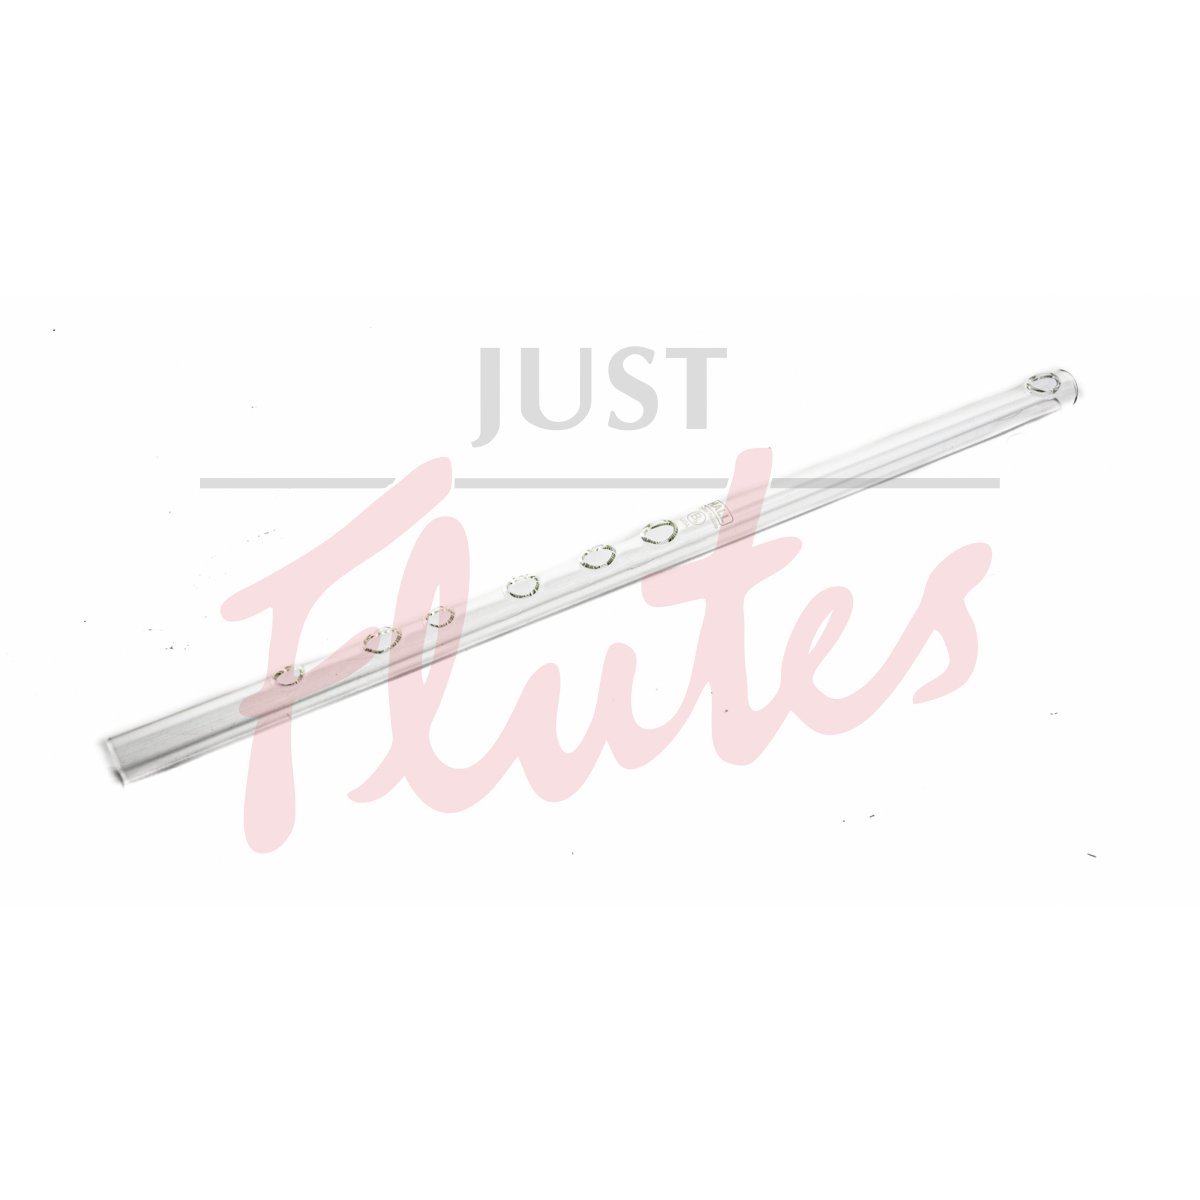 Hall 11499 Crystal Flute in Bb, Clear Glass